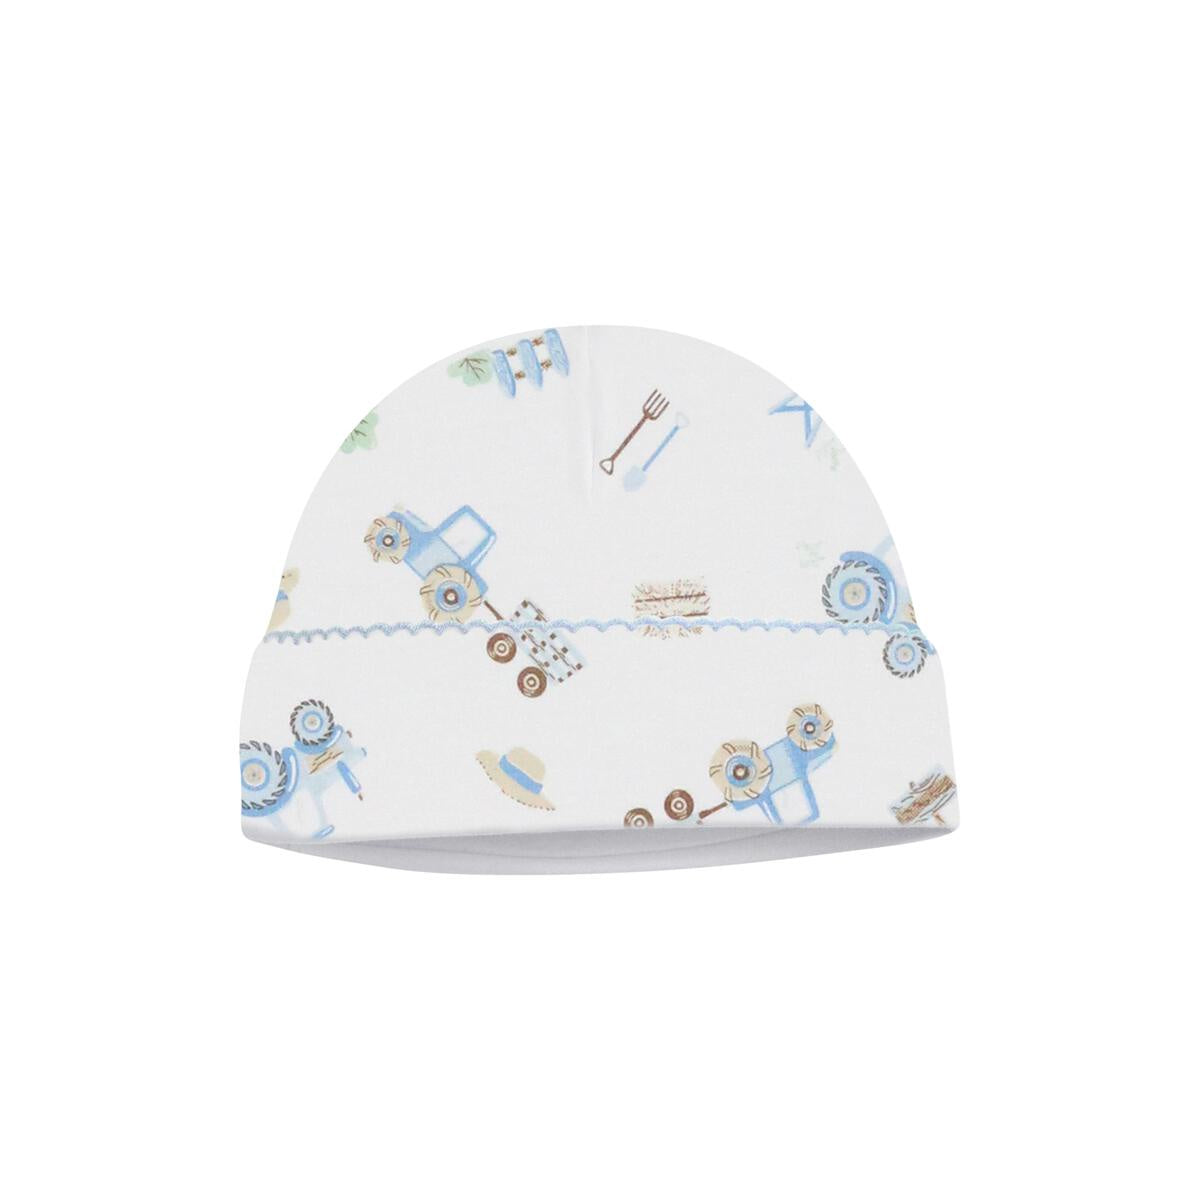 Lyda Baby In the Farm Print Hat PP07-7117 5007